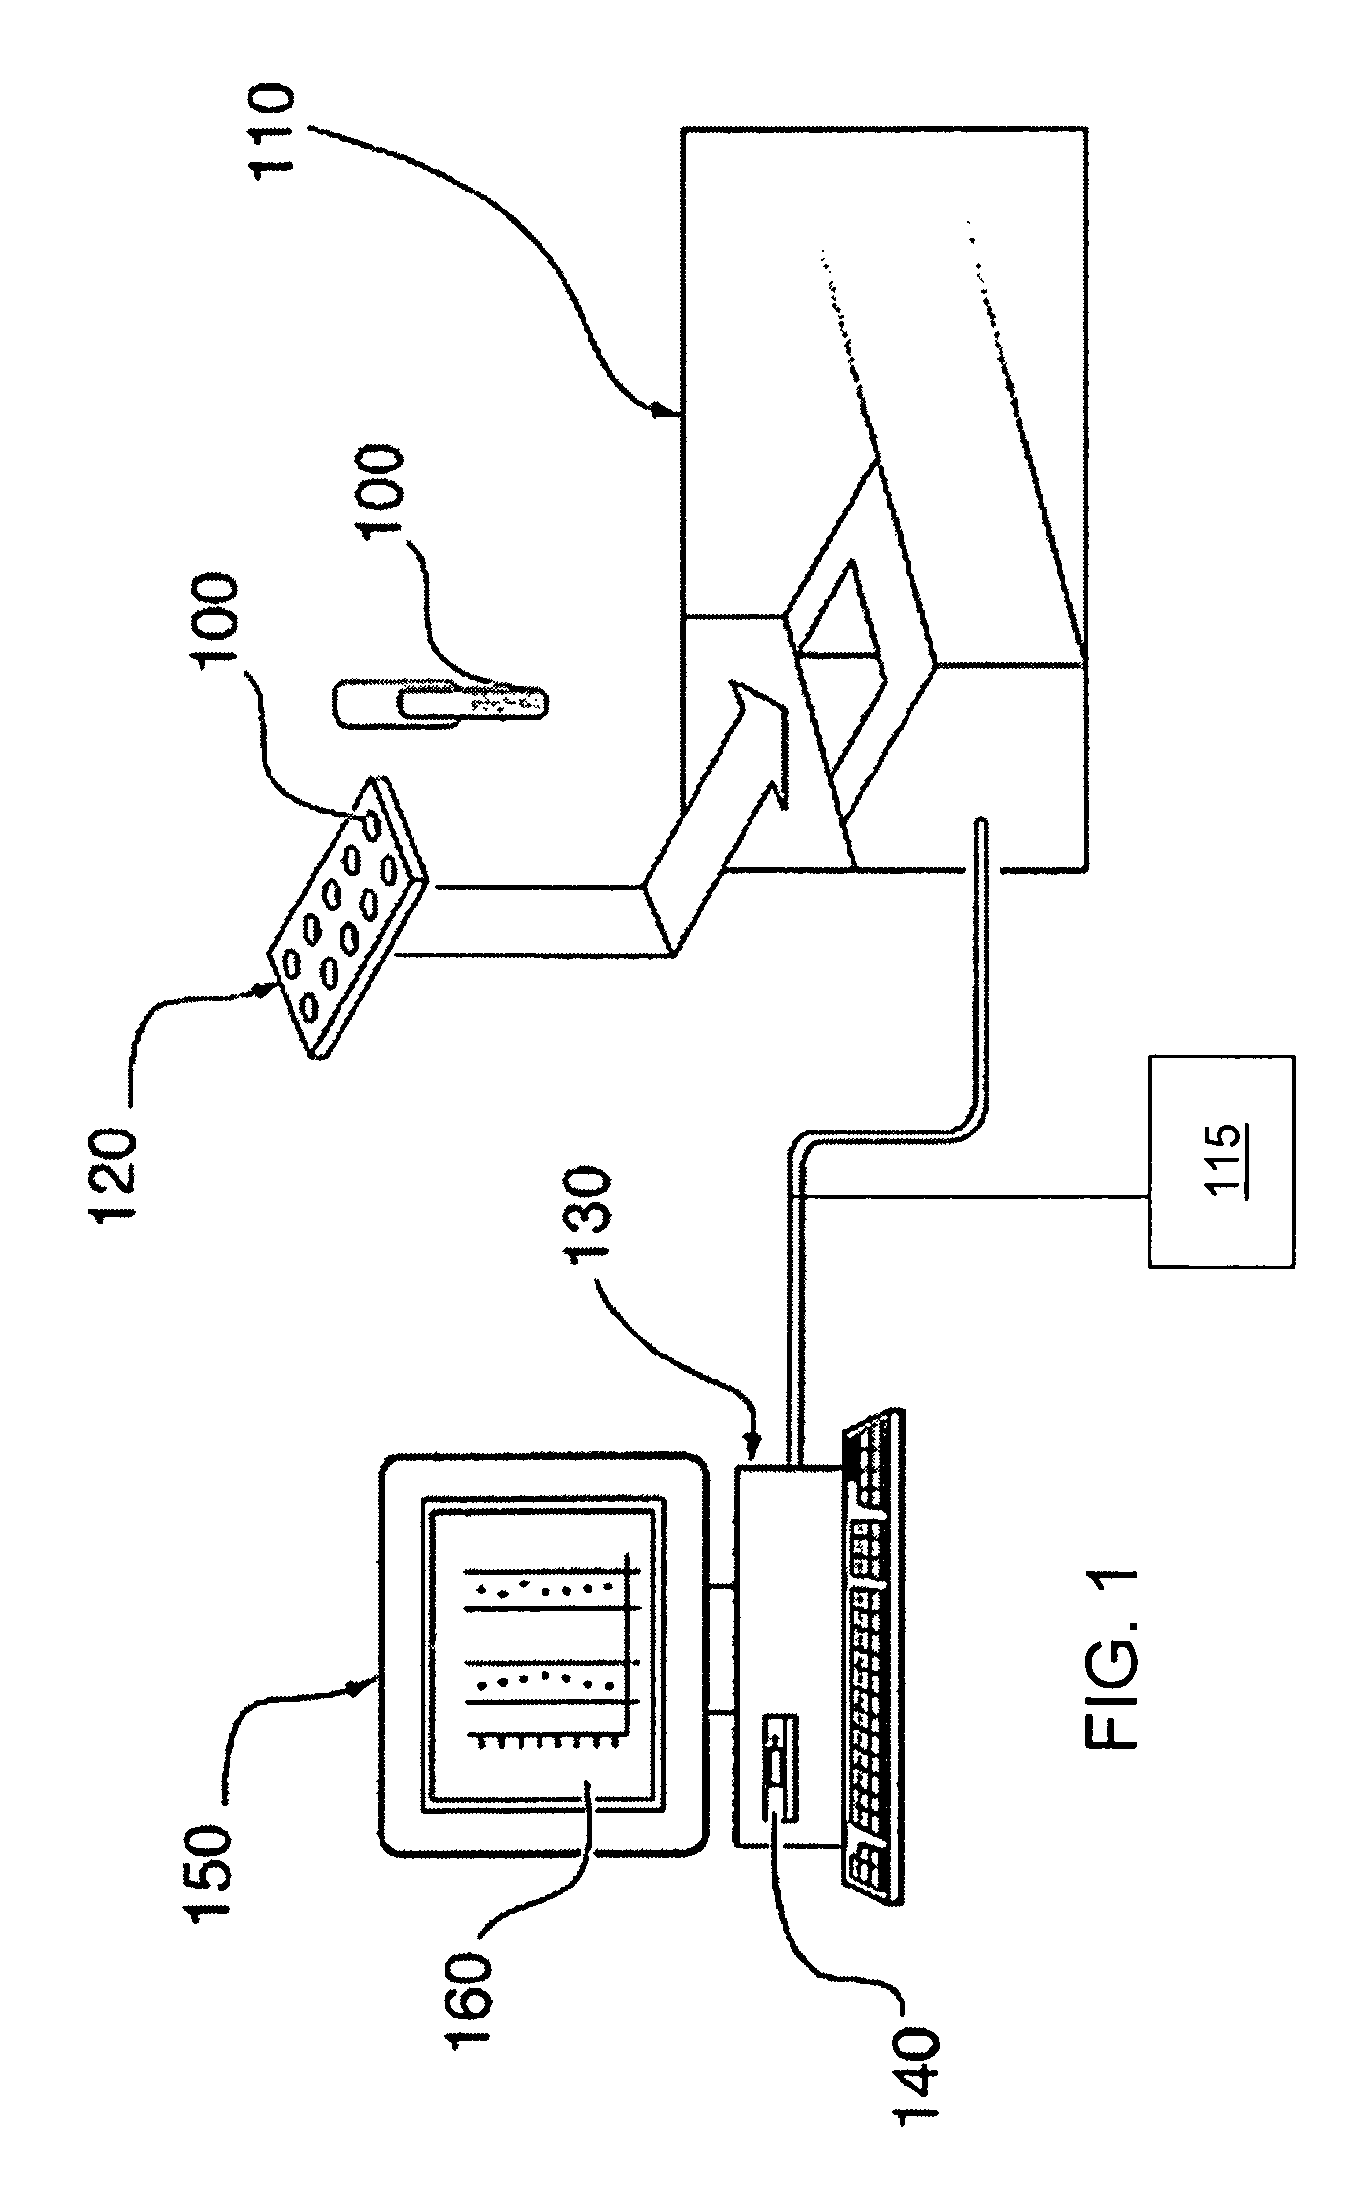 System and method for analyzing metabolomic data